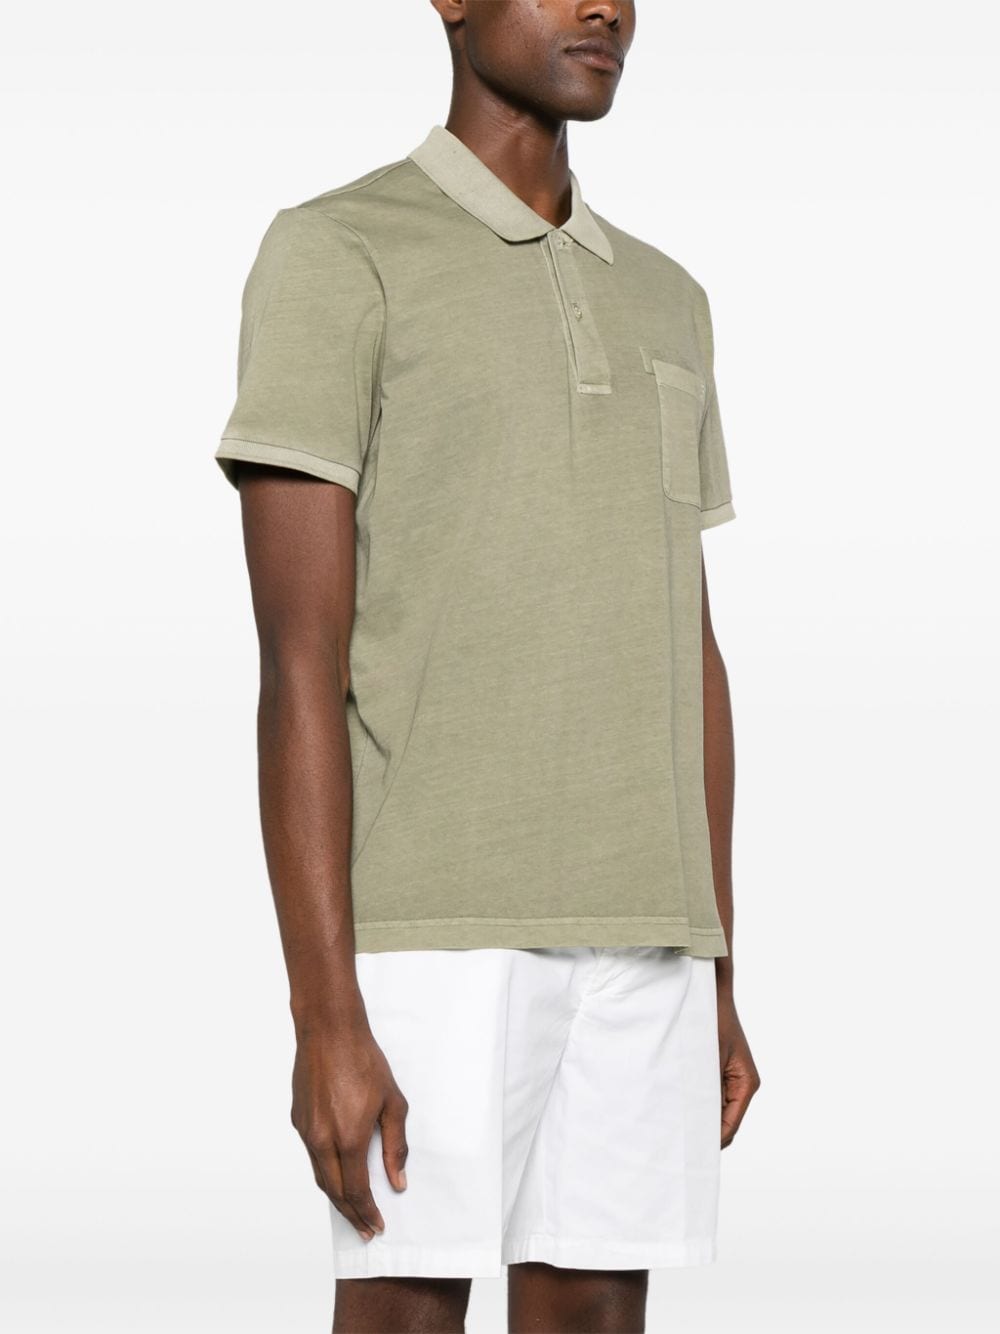 Fay FAY- Polo Jersey Frosted Embrioided Pocket